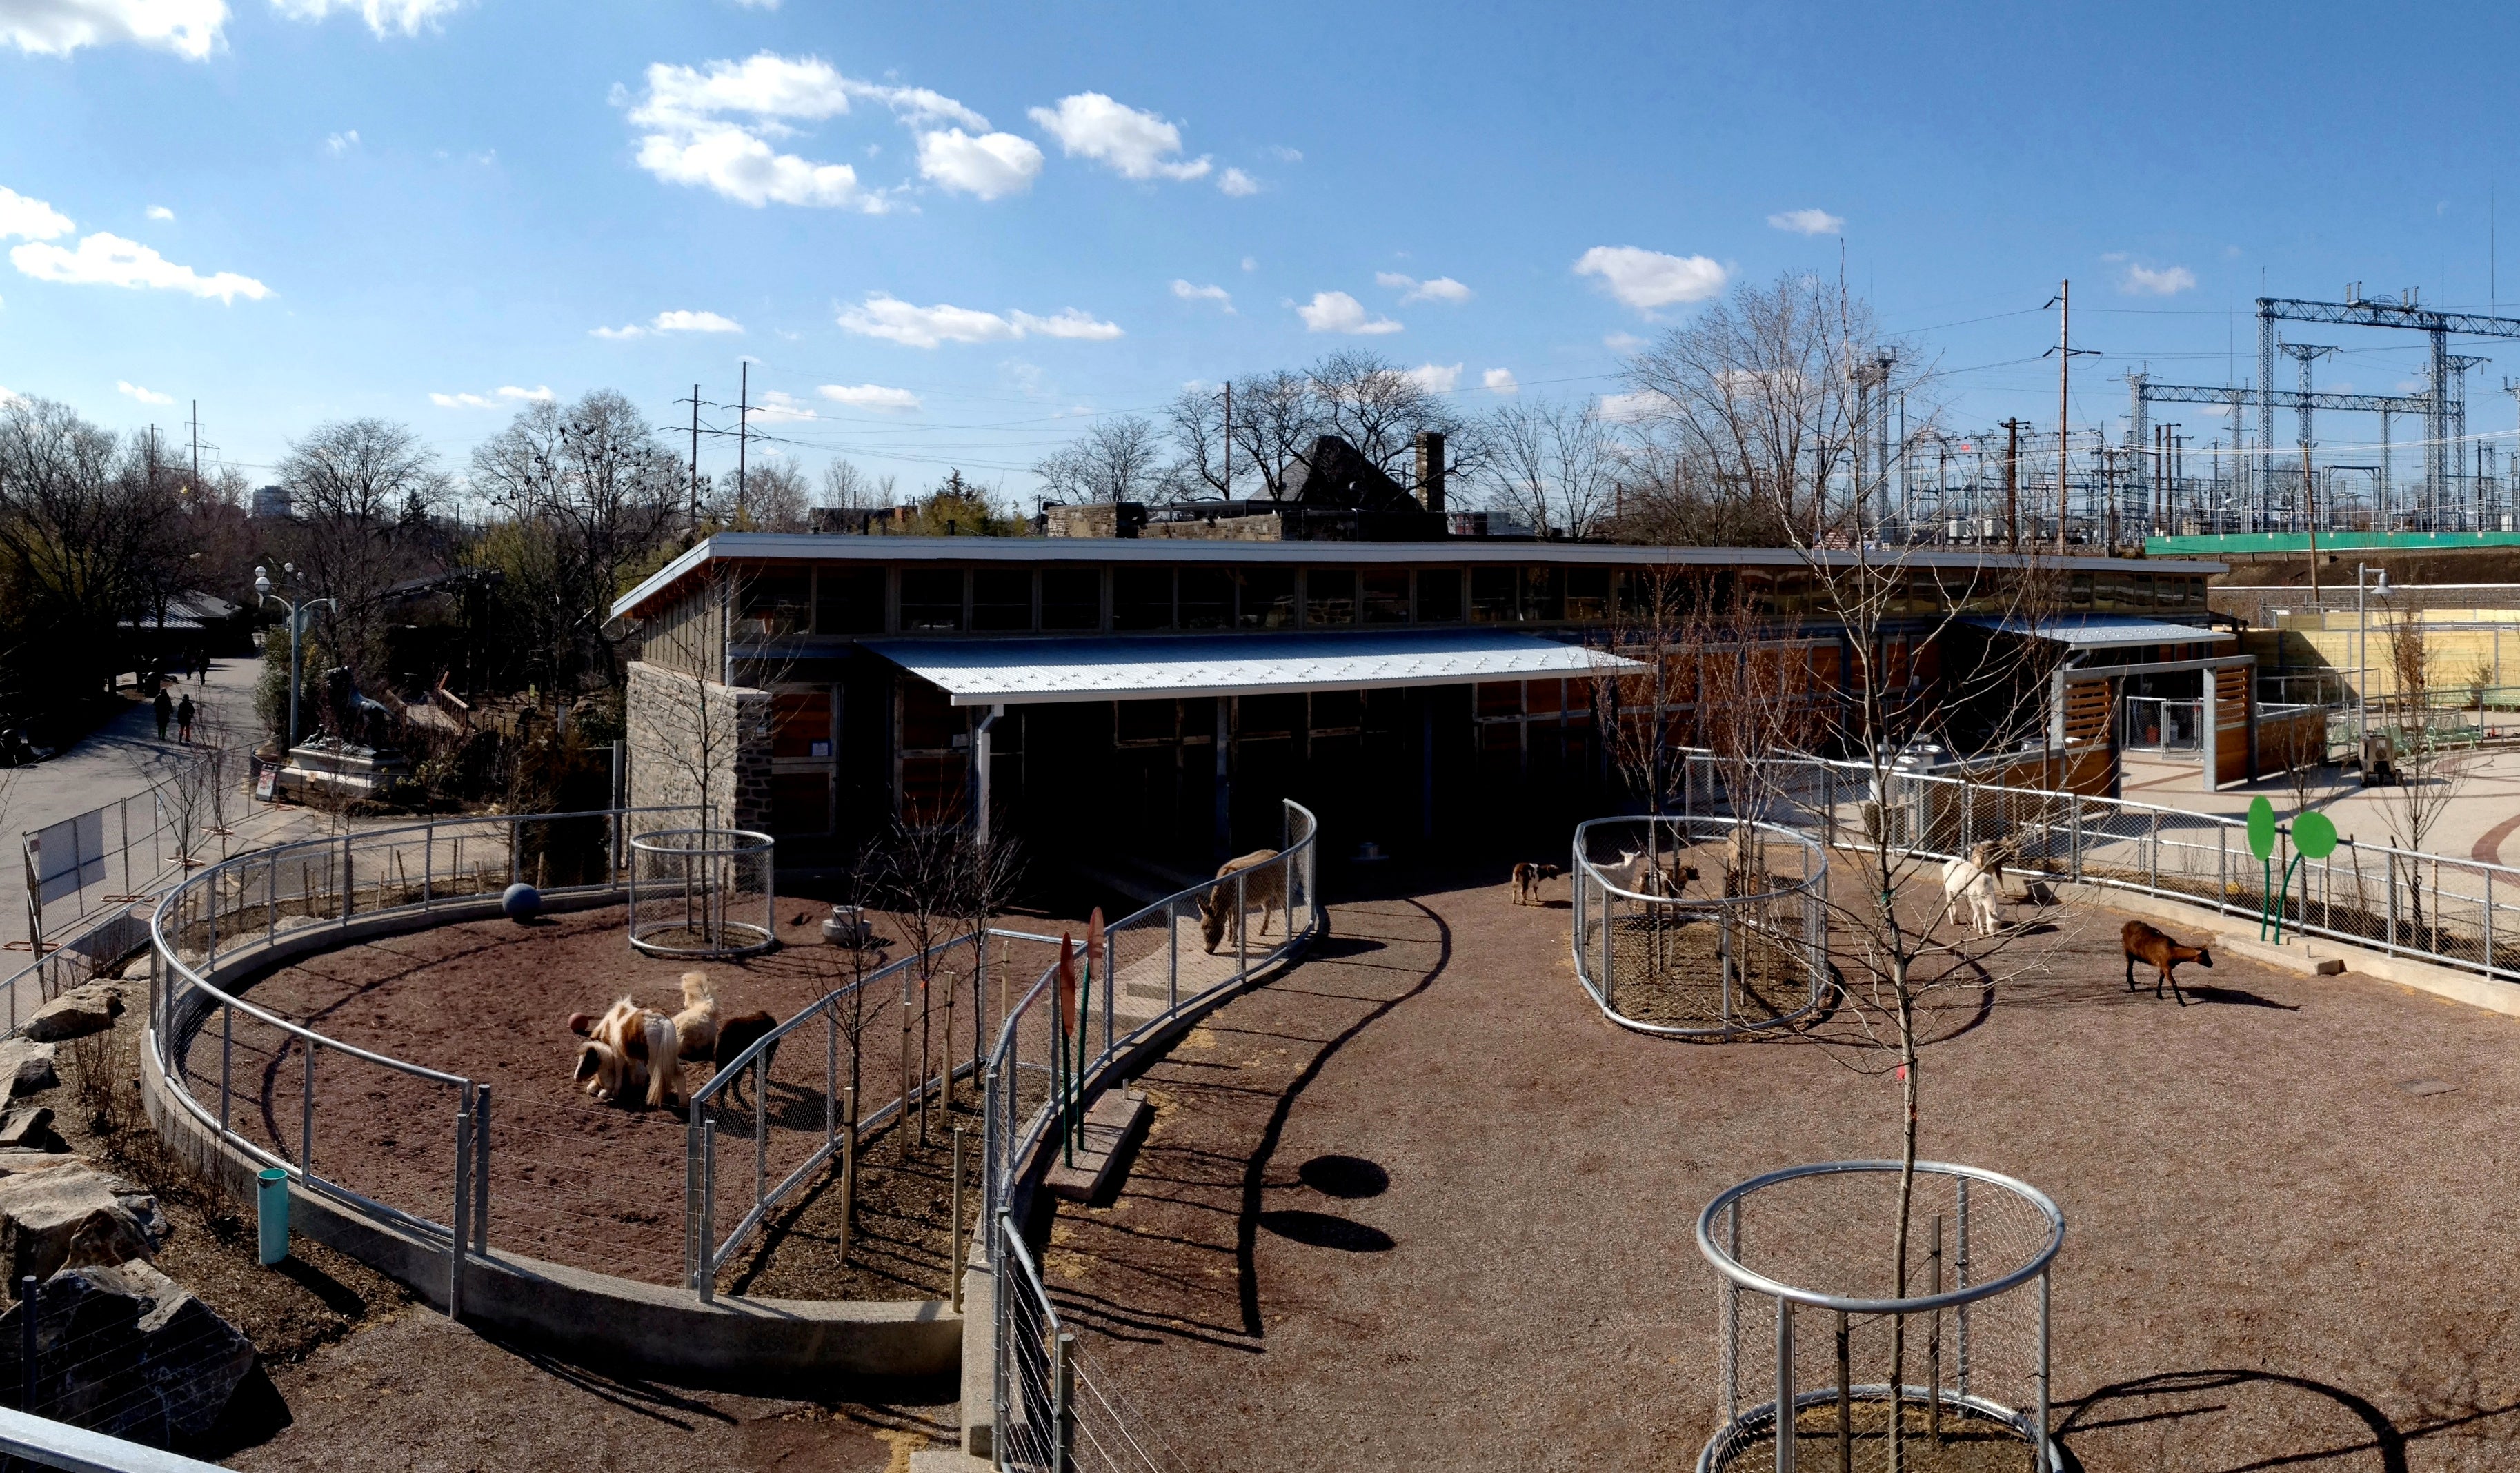 The new children's zoo design embraces the zoo's animal freedom strategy, Photo Courtesy of SMP Architects